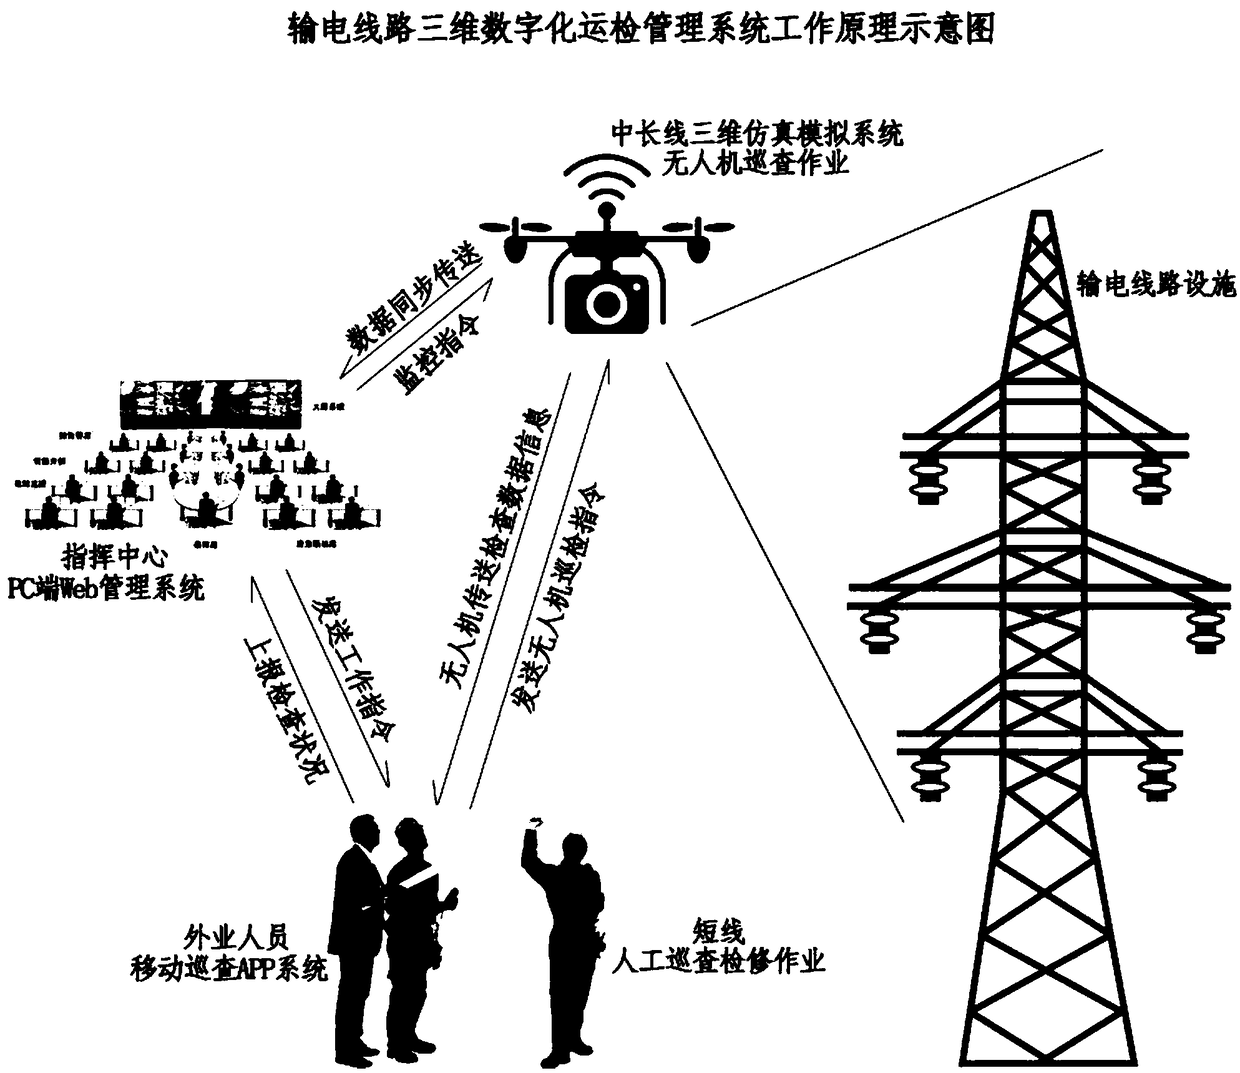 Operation maintenance and repair management system with 3D digitalization for transmission lines